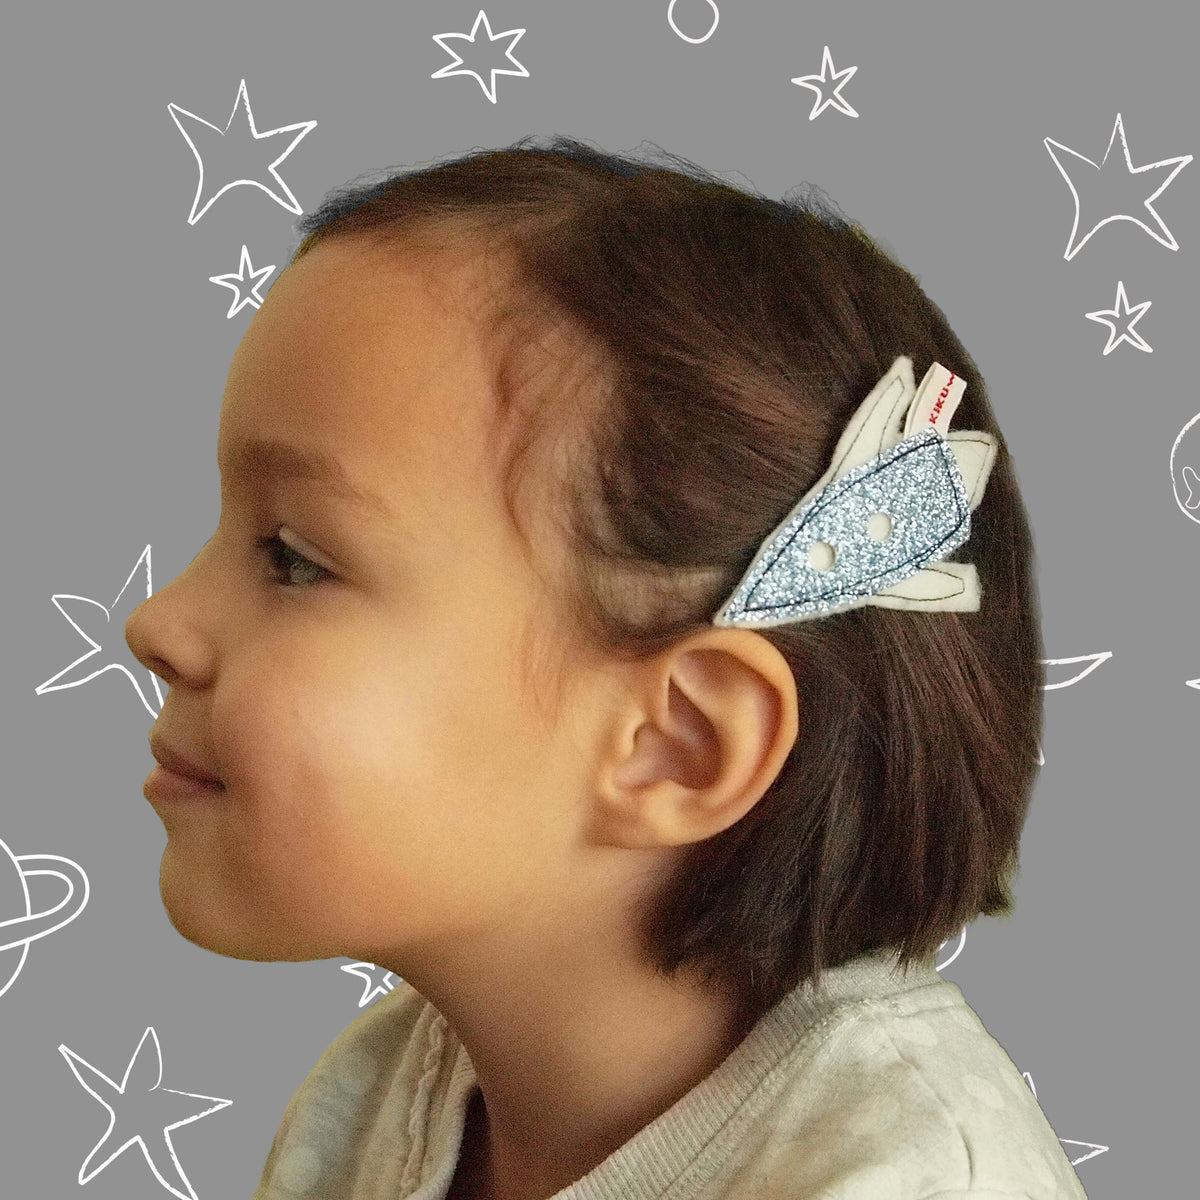 Little space explorer with her cute spaceship hair clip, made by doodlelidoo.